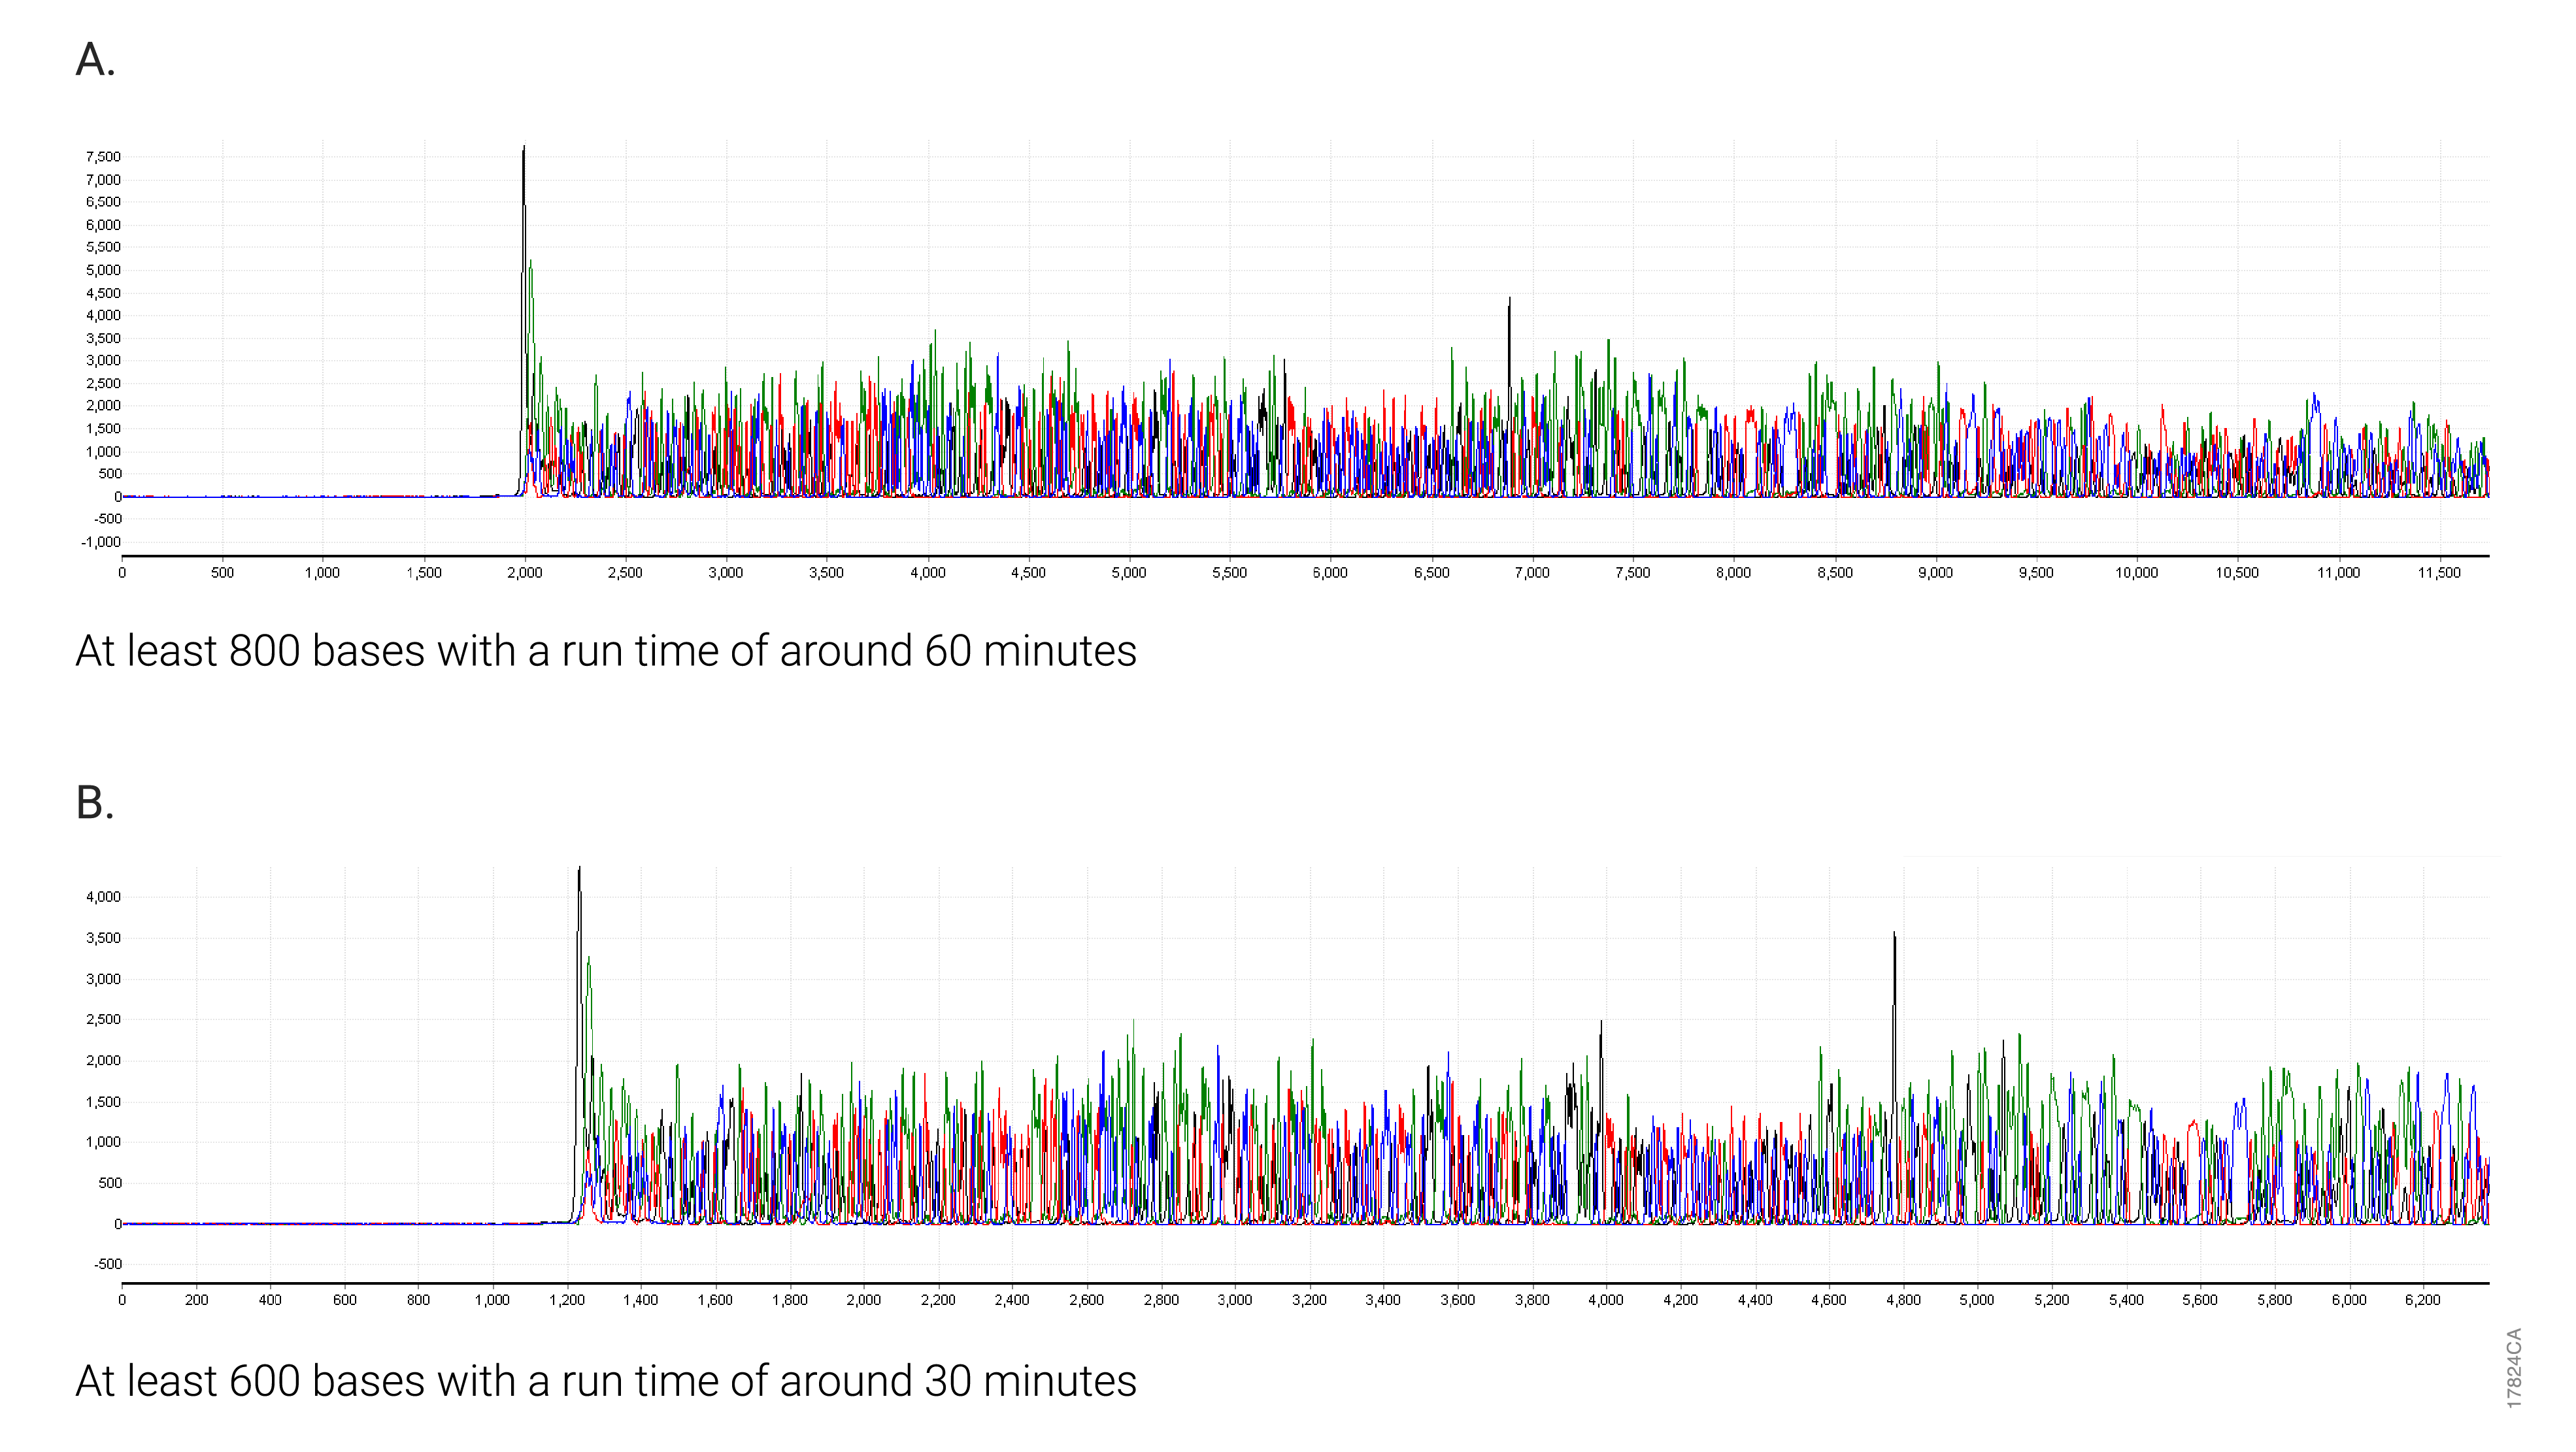 Example data showing sequencing reads of 600 bases and 800 bases.